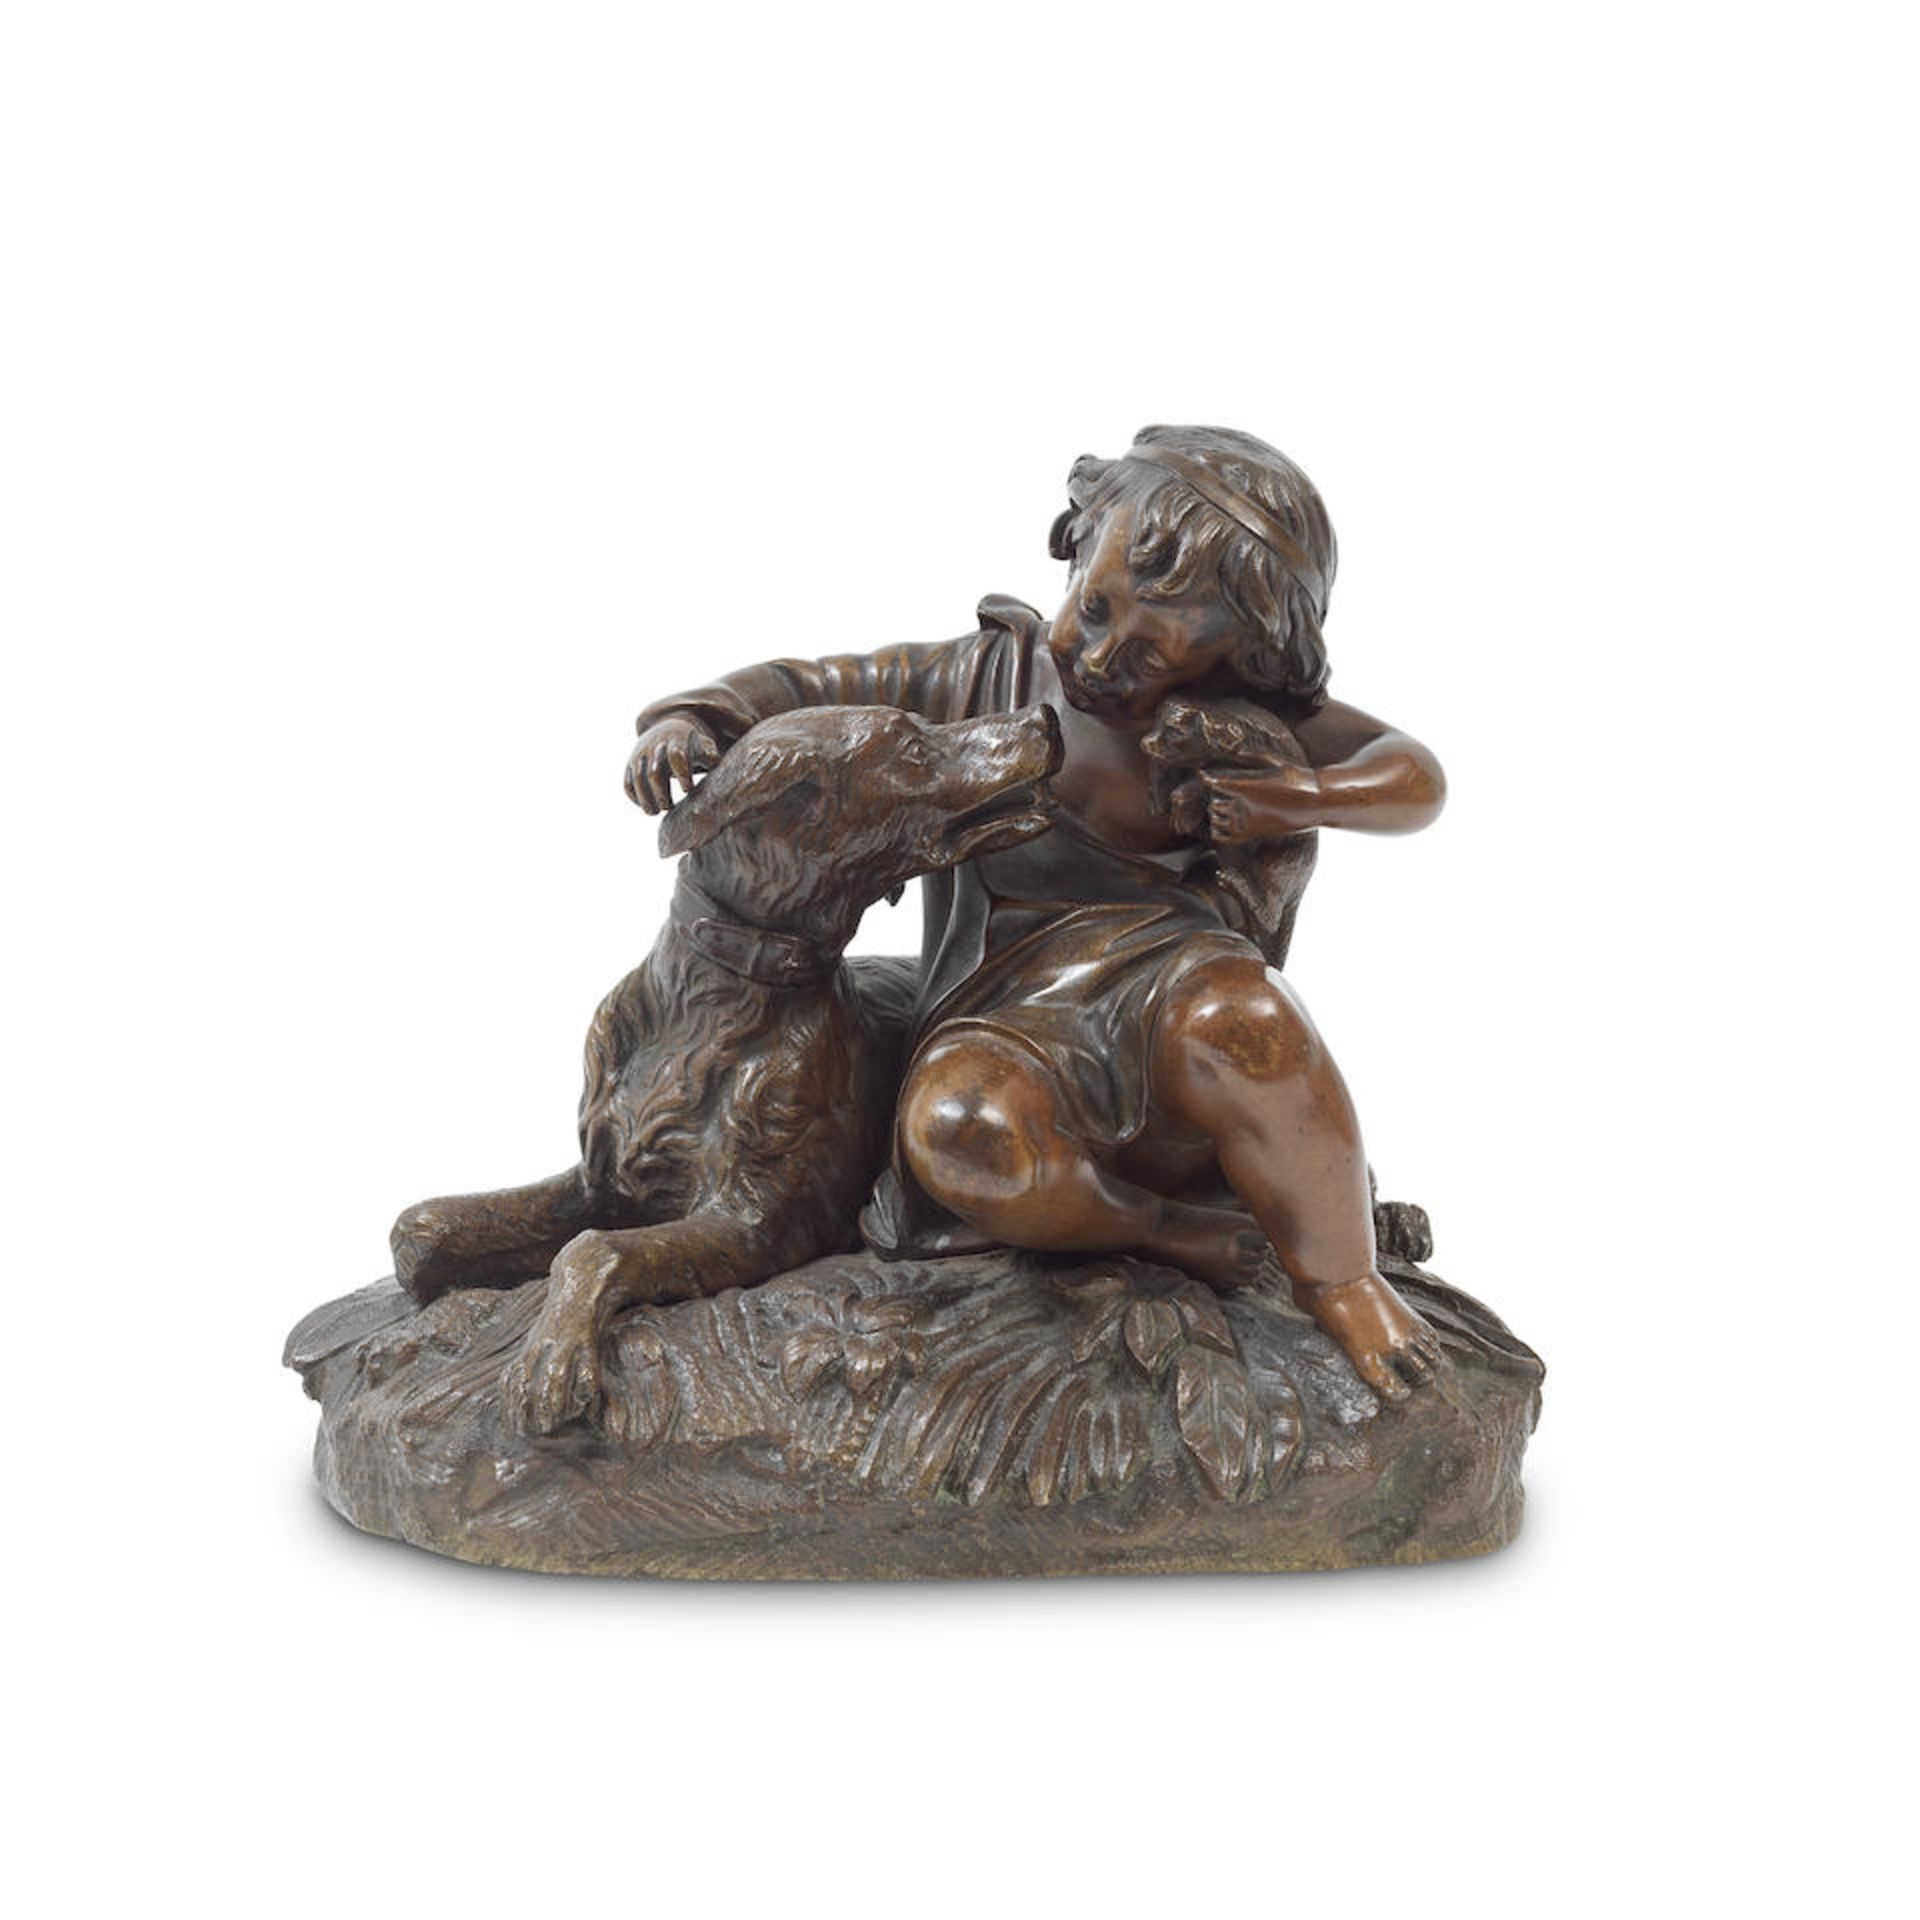 A mid 19th century French gilt bronze figure of a child and a seated hound